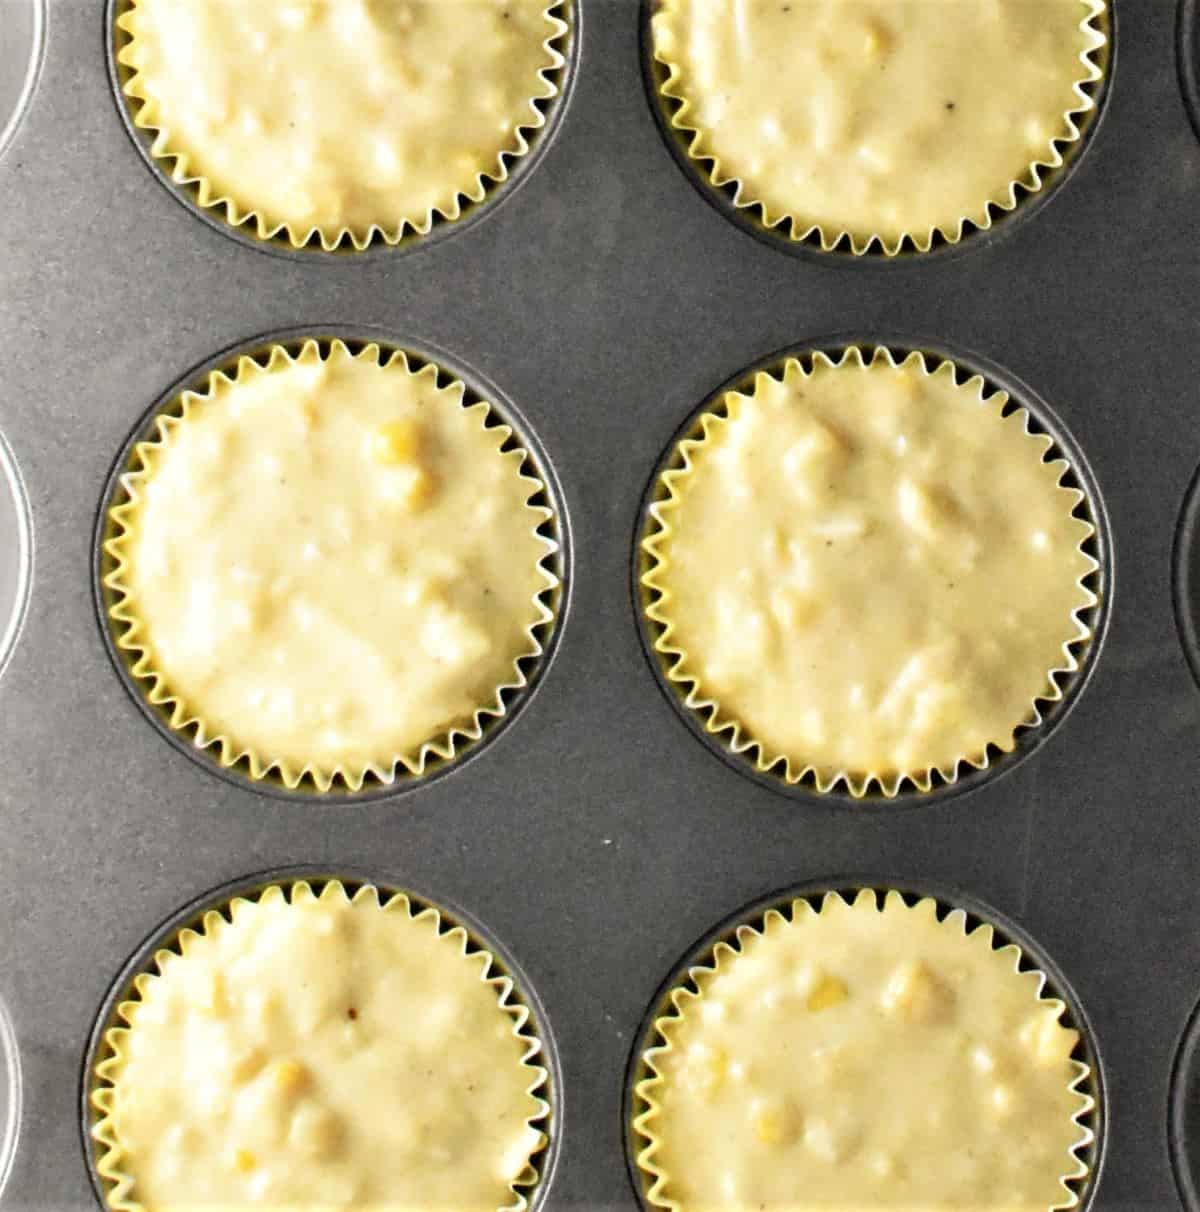 Sweetcorn muffin batter in cases inside muffin pan.